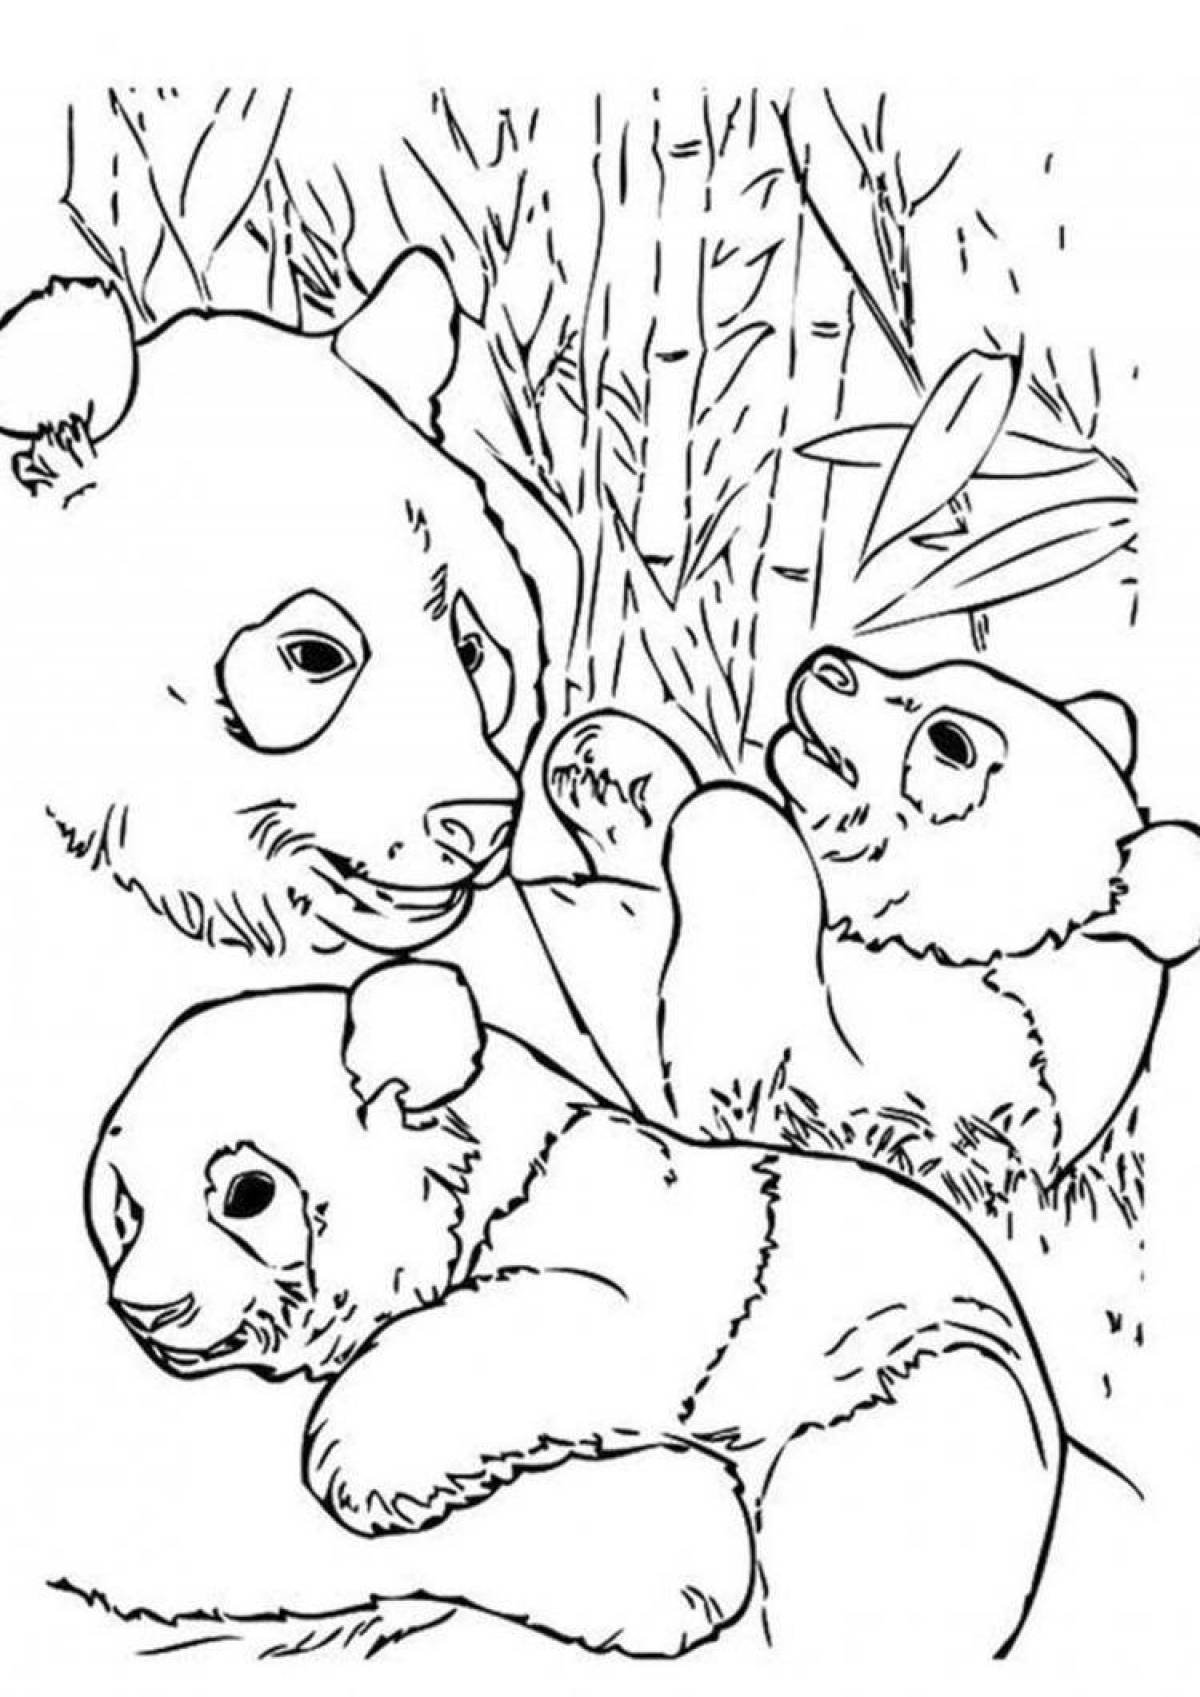 Playful coloring of domestic animals and their cubs